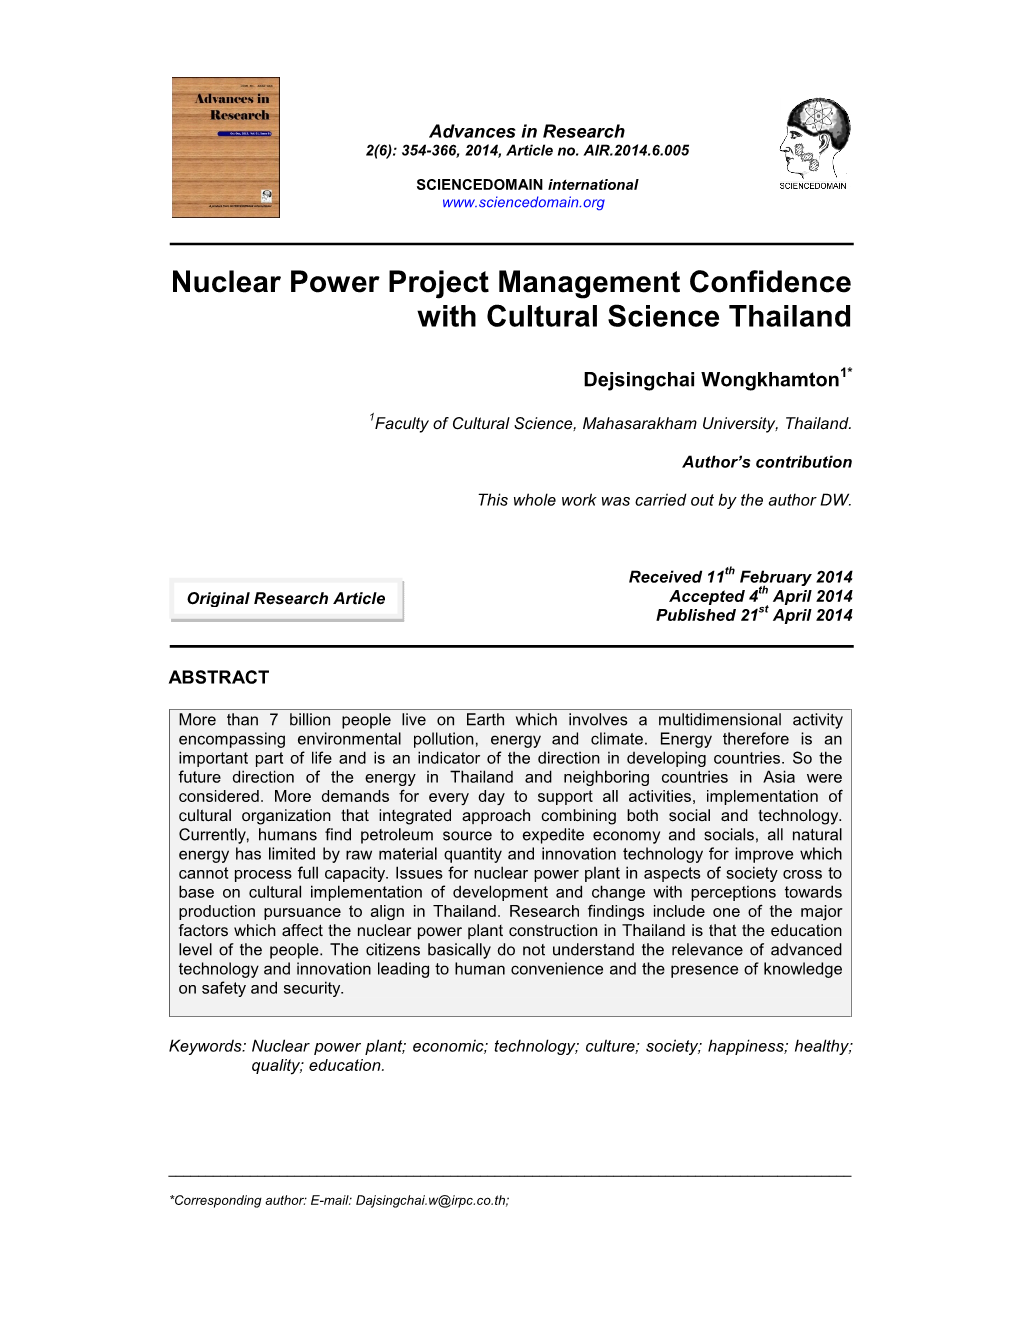 Nuclear Power Project Management Confidence with Cultural Science Thailand